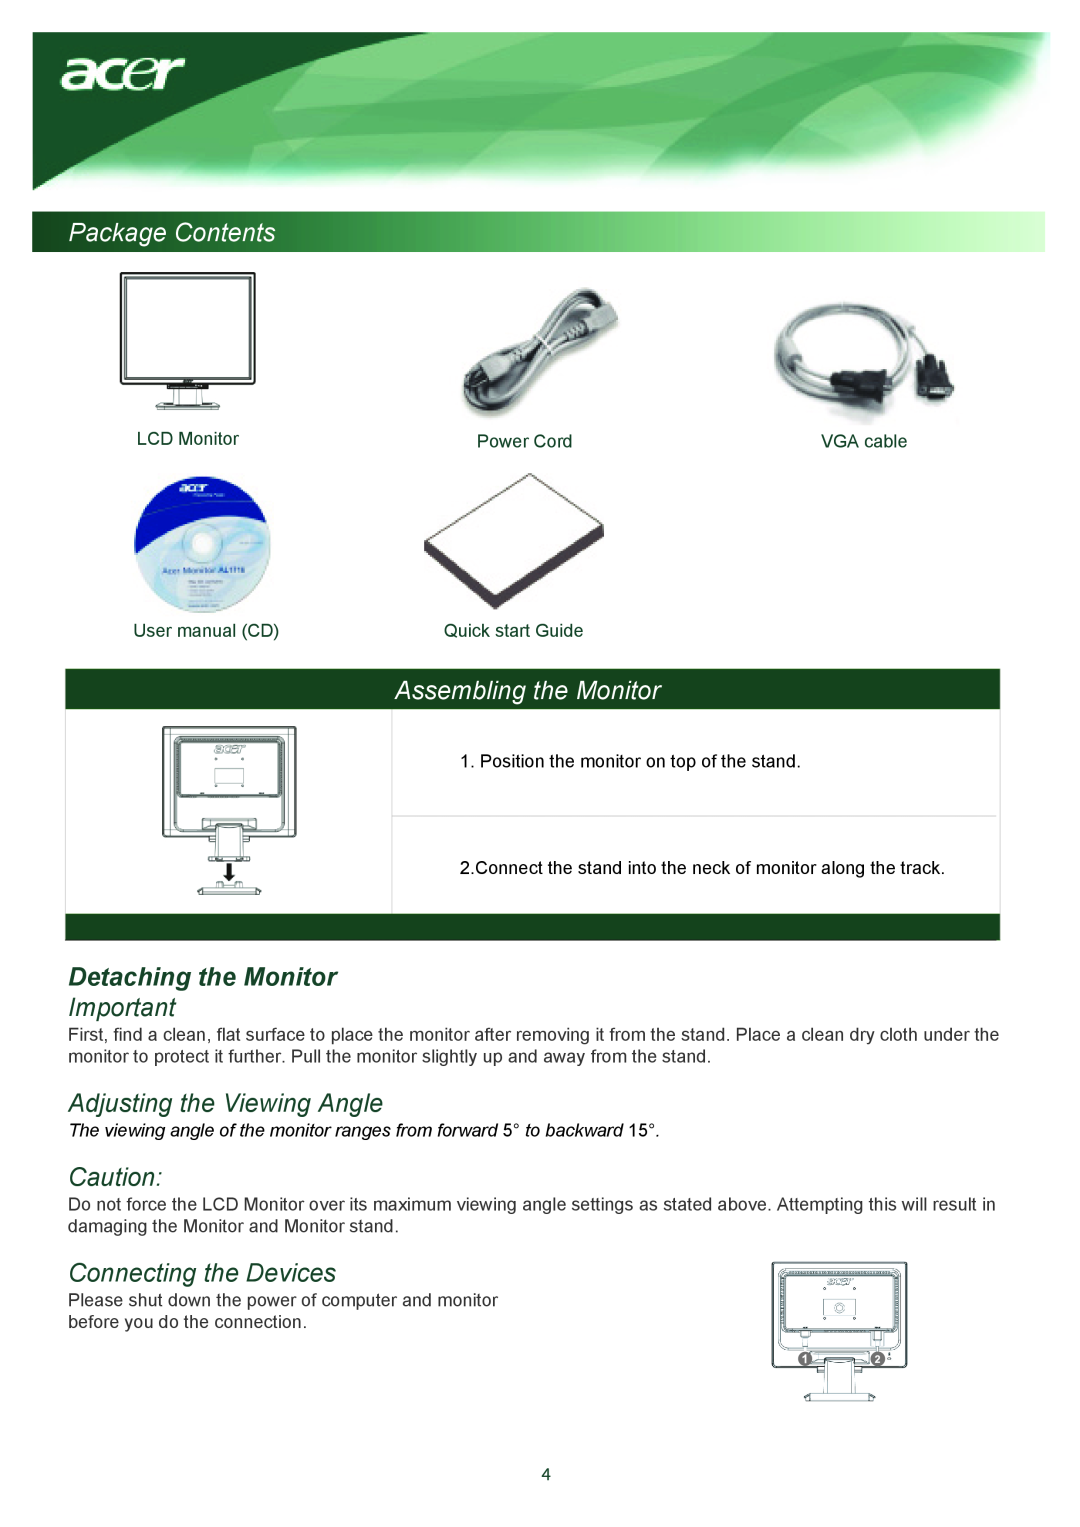 Acer TCO03 Package Contents, Assembling the Monitor, Detaching the Monitor, Adjusting the Viewing Angle, LCD Monitor 